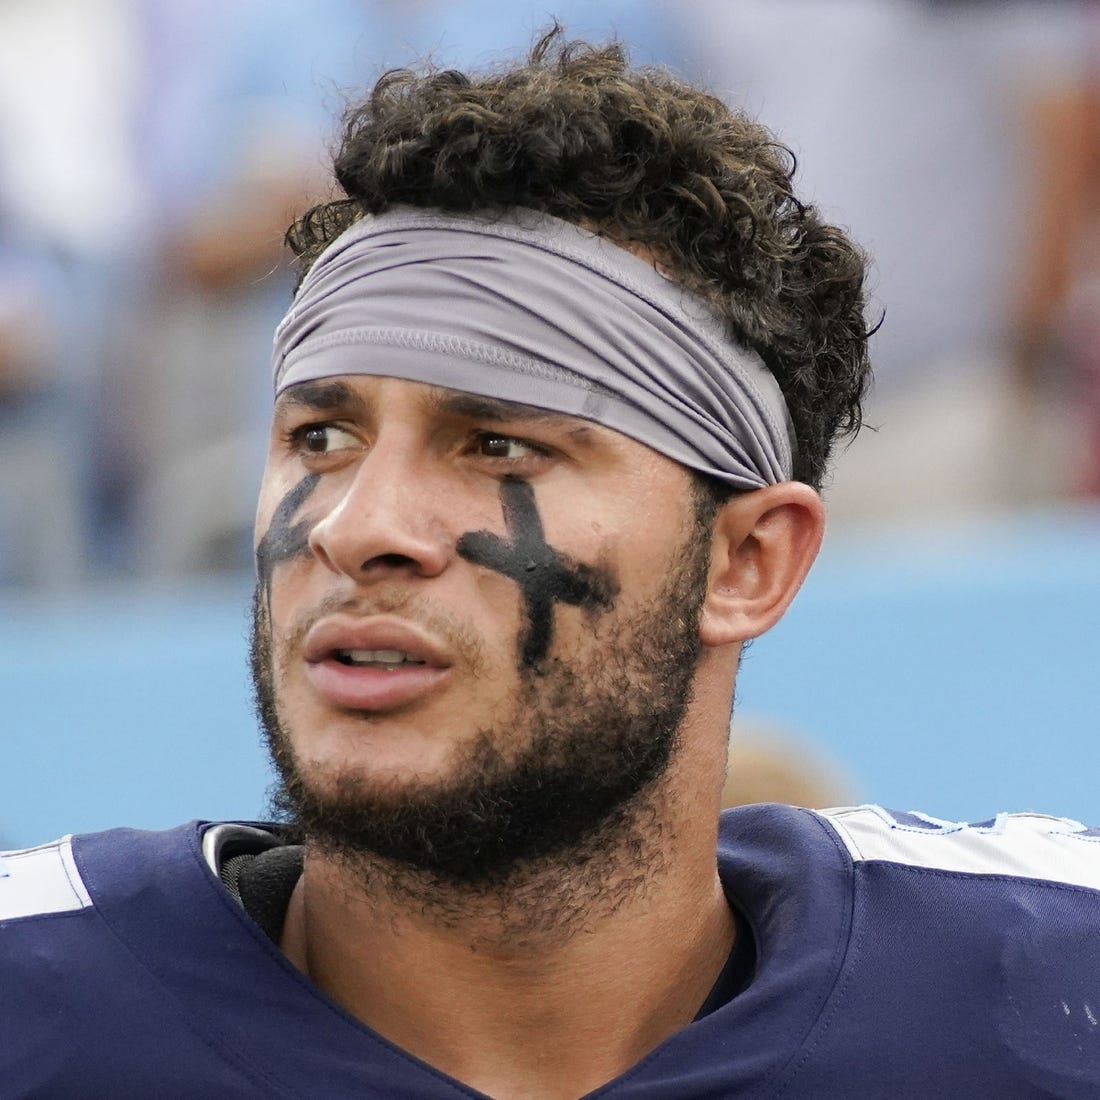 Aug 20, 2022; Nashville, Tennessee, USA; Tennessee Titans cornerback Caleb Farley (3) reacts before a preseason game against the Tampa Bay Buccaneers at Nissan Stadium. Mandatory Credit: George Walker IV-USA TODAY Sports